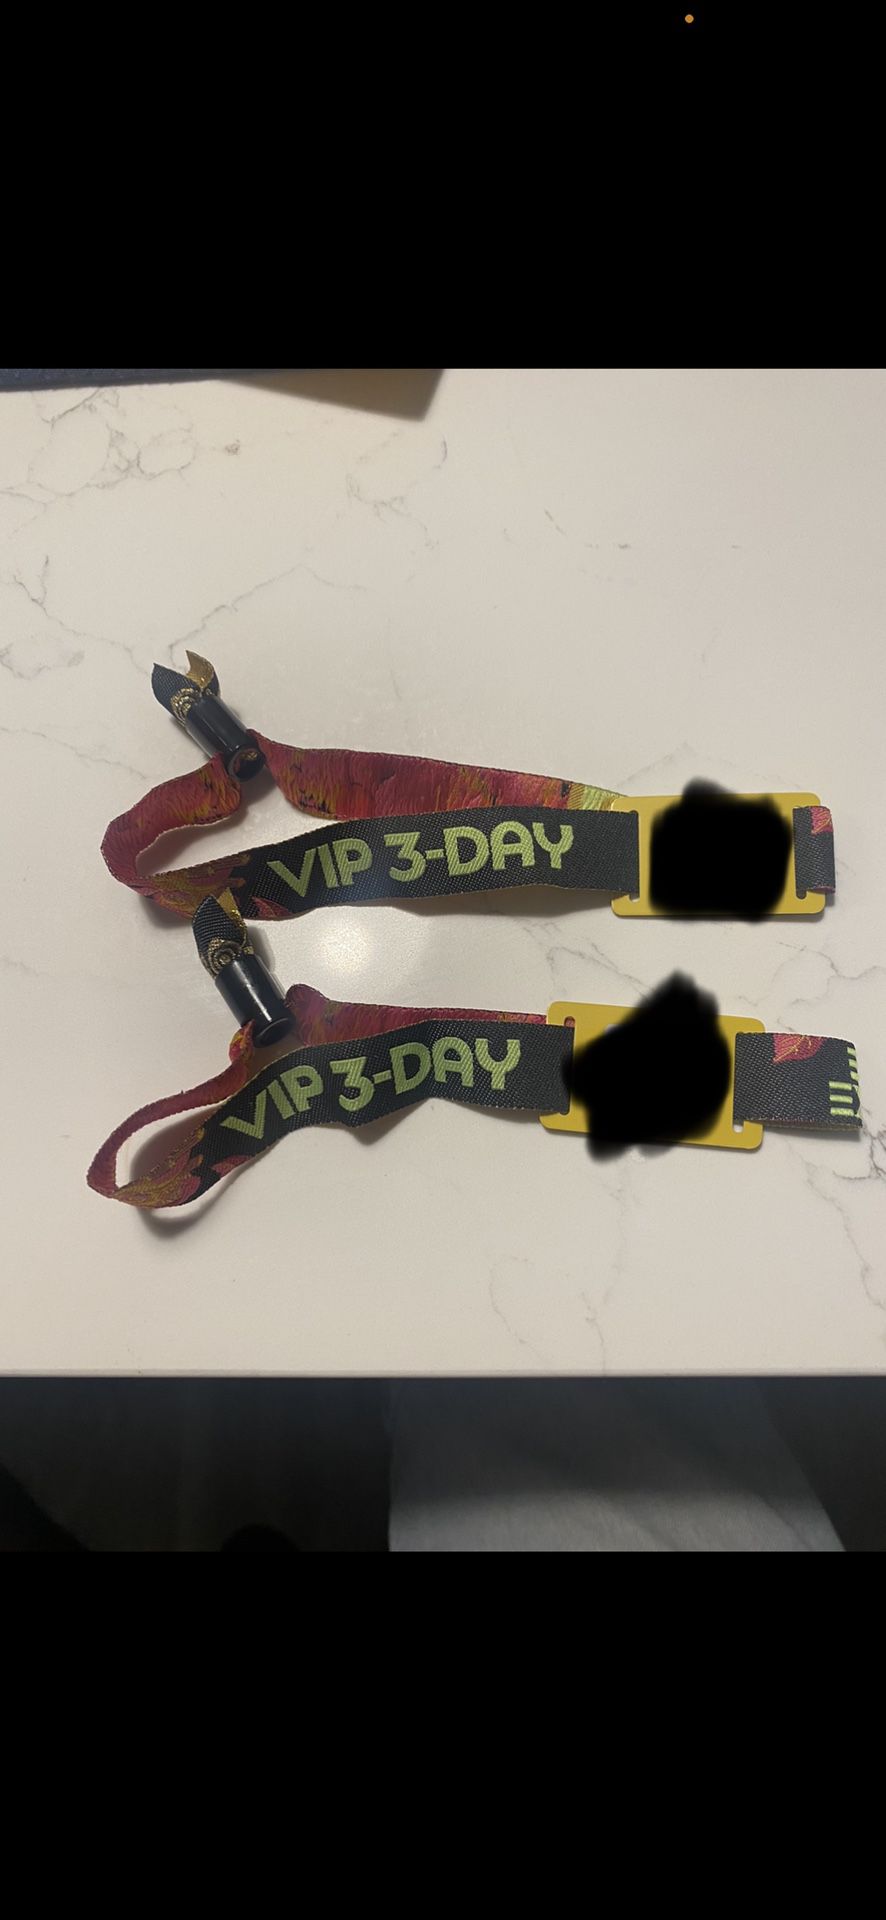 EDC ORLANDO 3 DAY VIP ELEVATED EXPERIENCE wristbands 